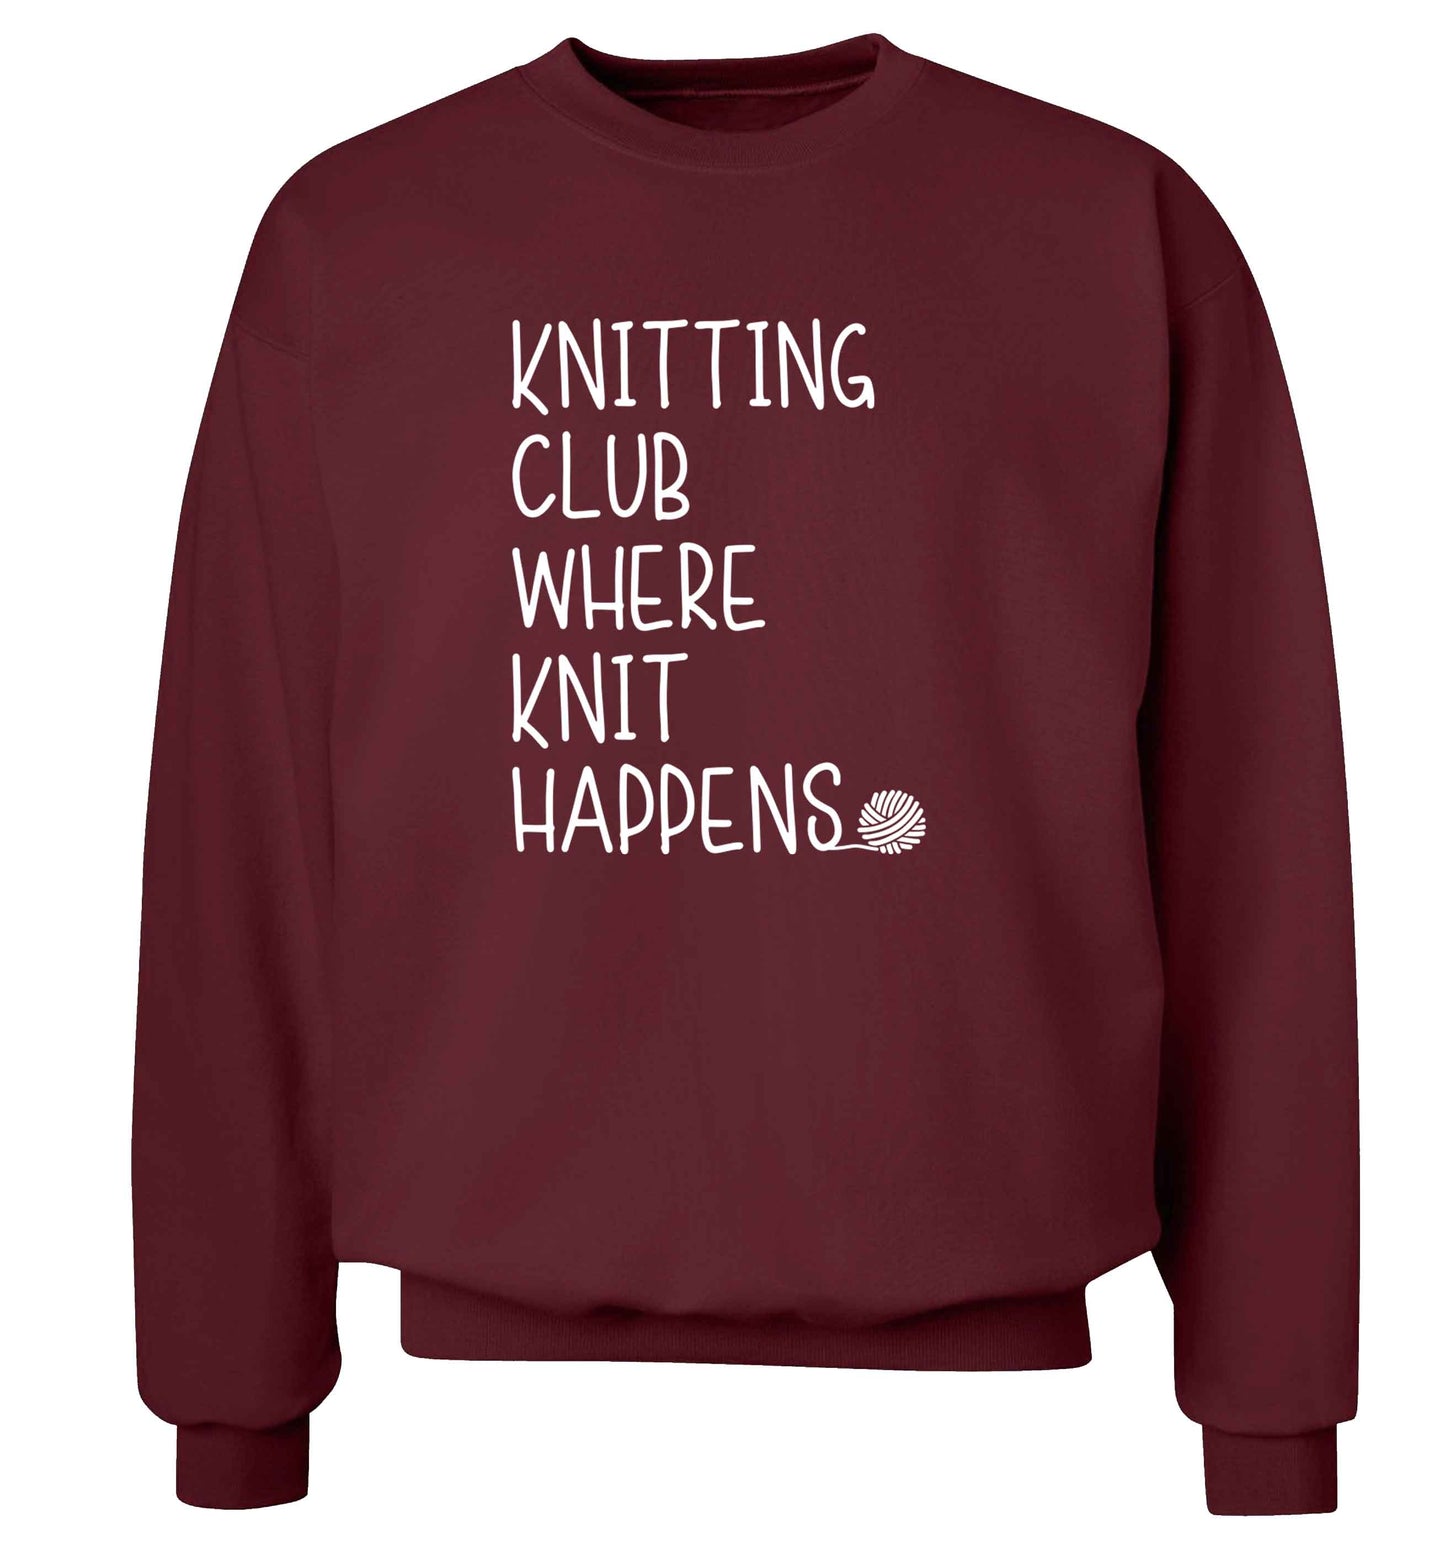 Knitting club where knit happens adult's unisex maroon sweater 2XL